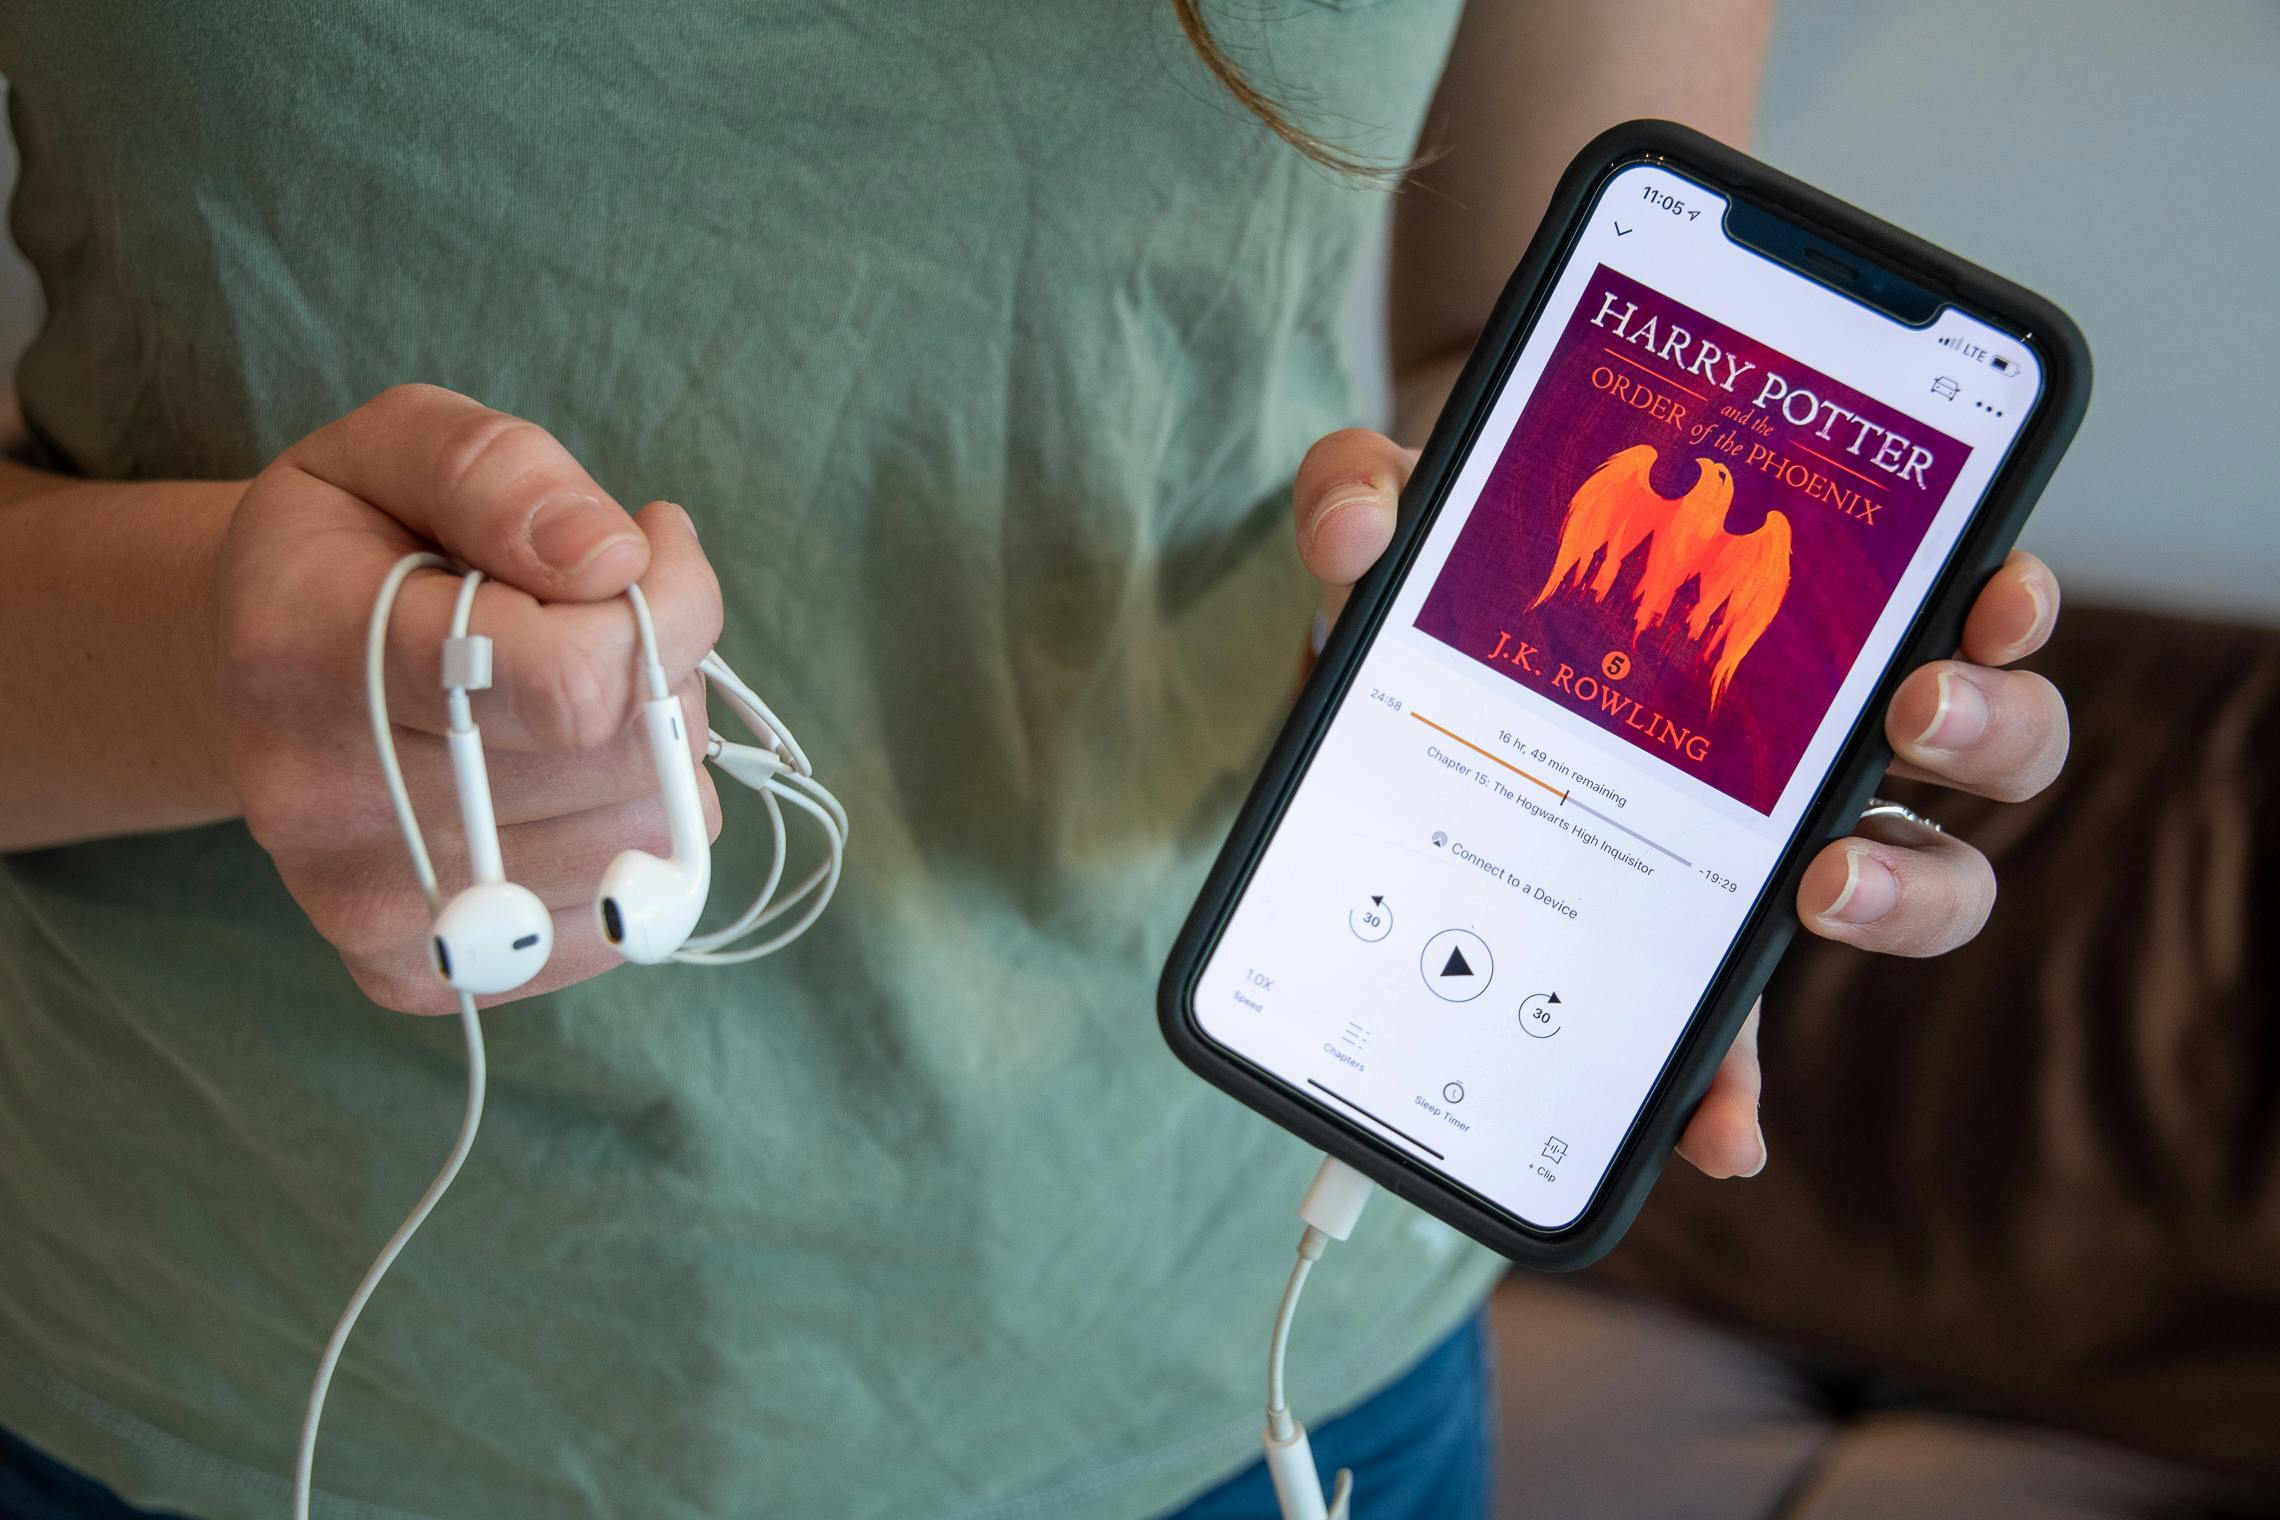 A woman holding an iPhone and head phones with Harry Potter and the Order of the Phoenix from audible on the screen.